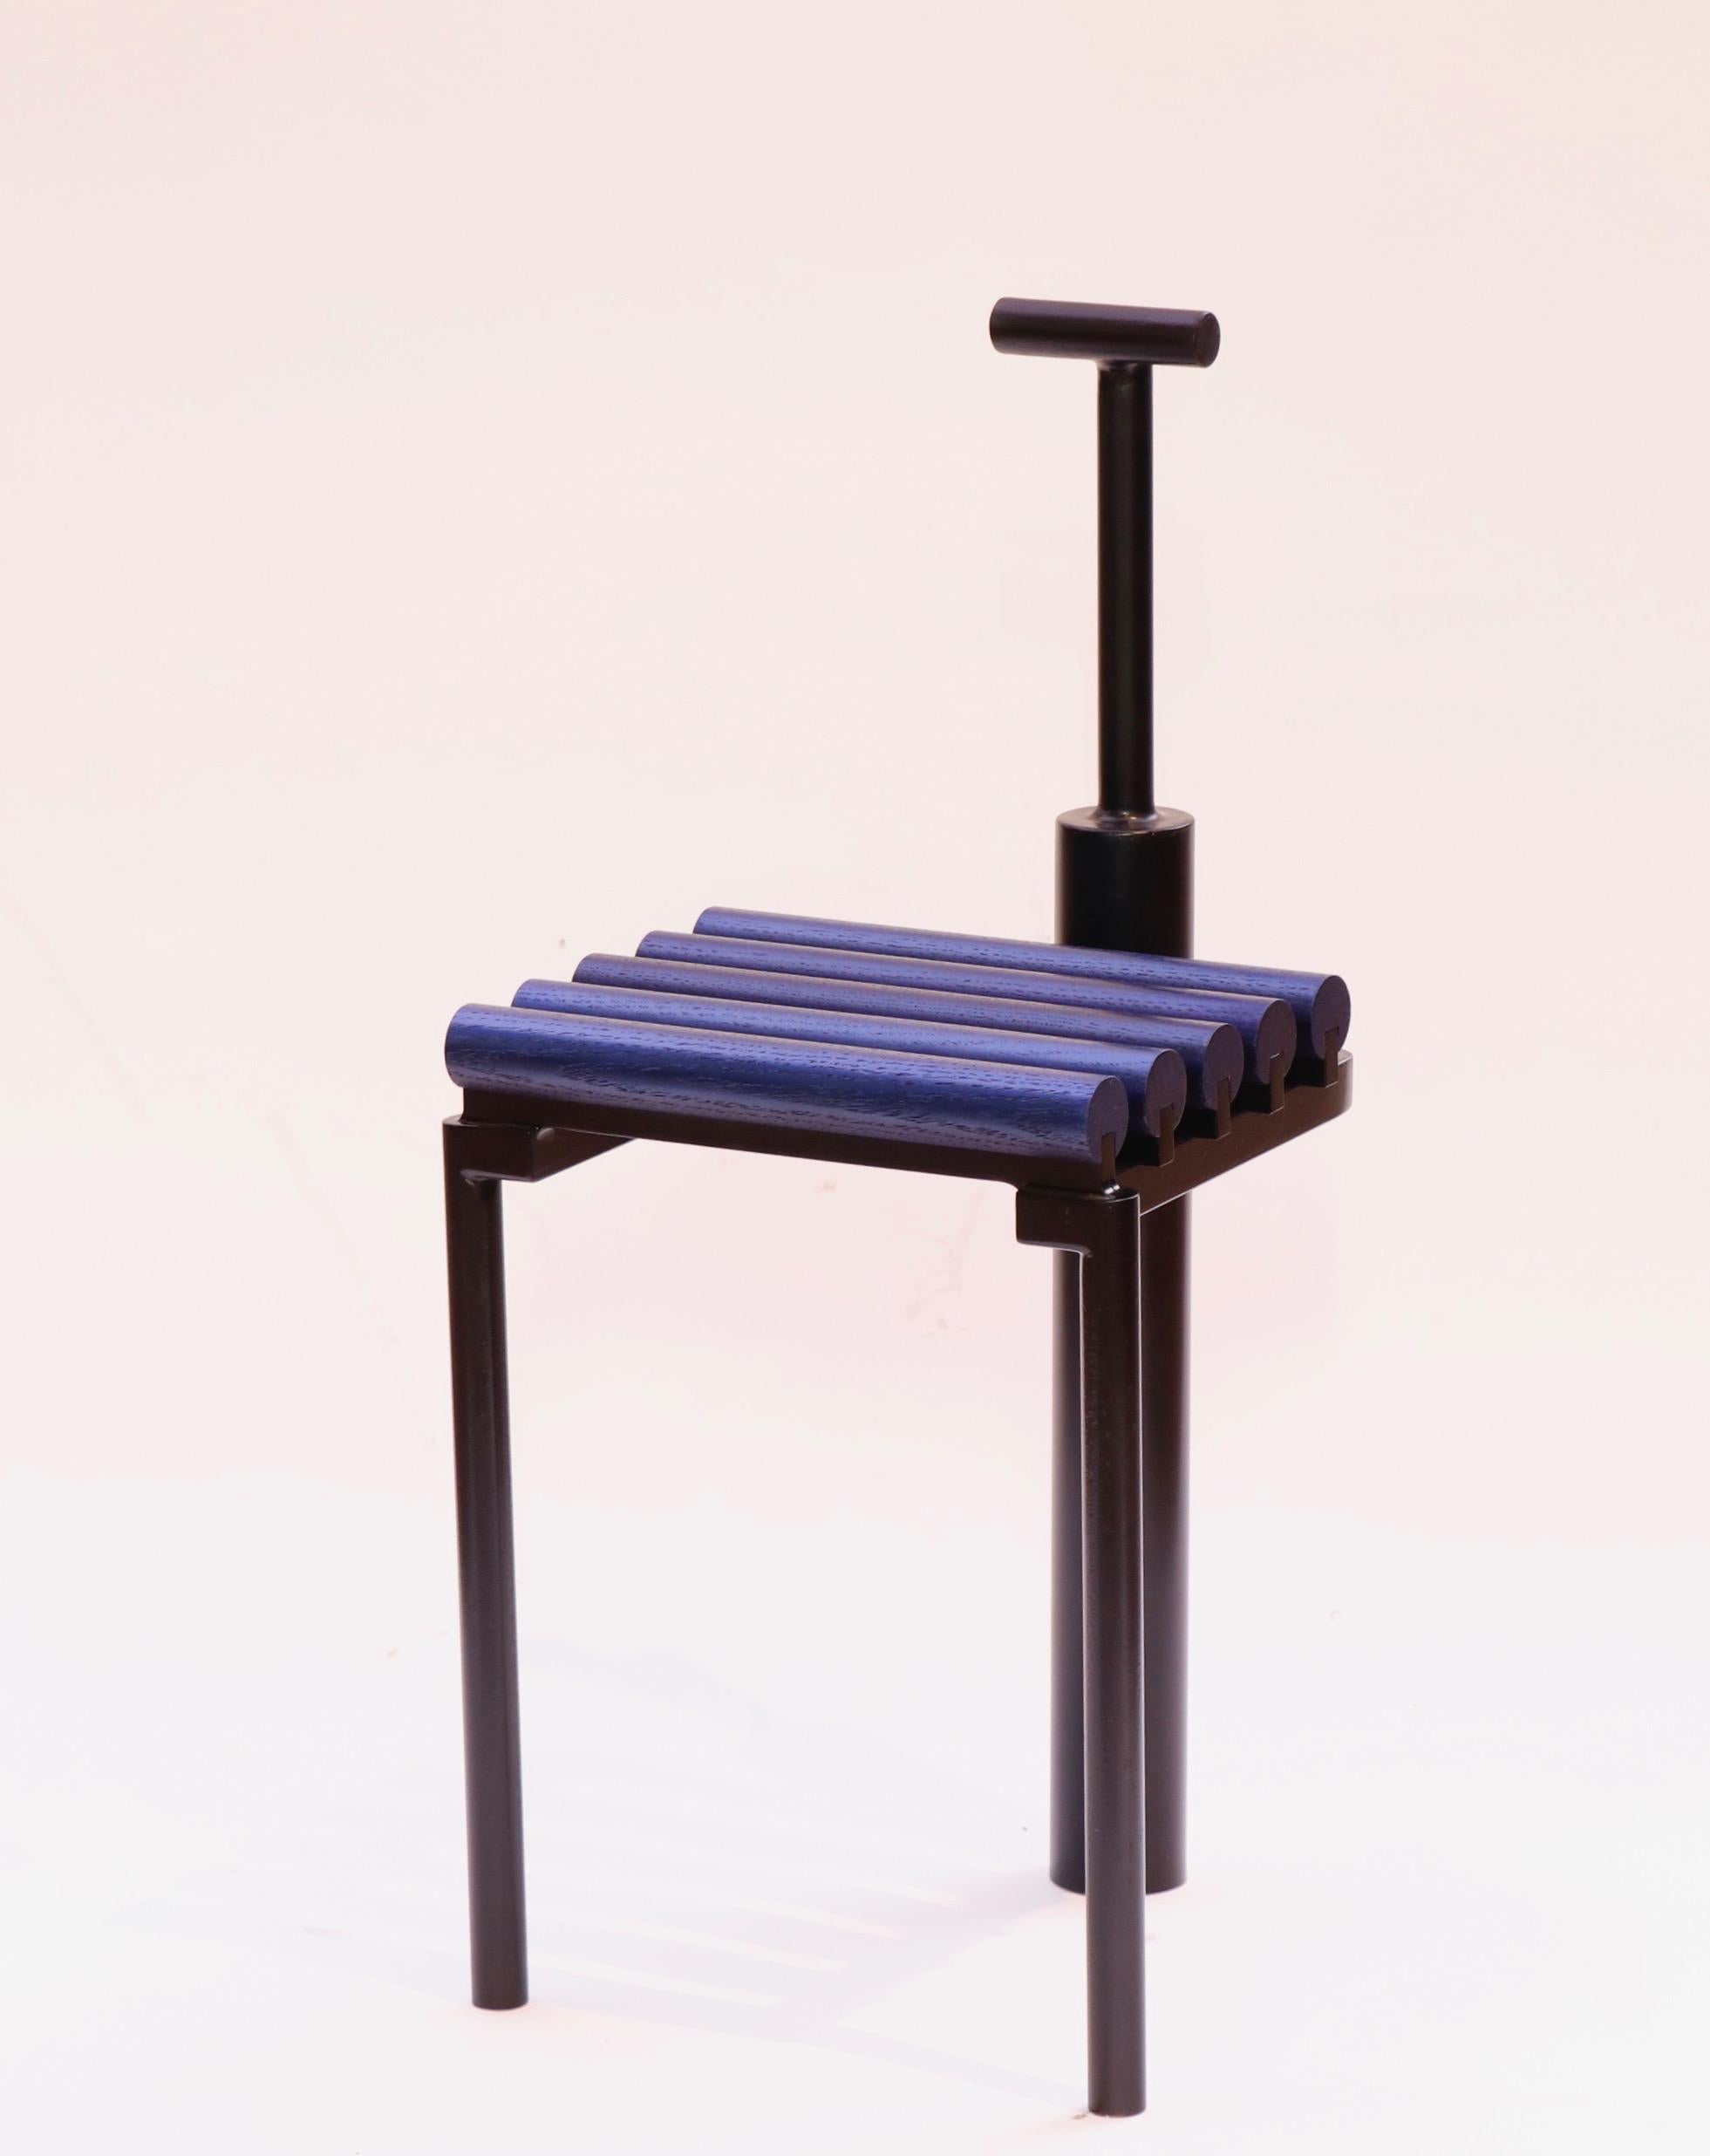 Statement chair fabricated from steel and white oak. Steel is coated with black epoxy paint, oak is coated with metallic blue paint. Chair is small, meant to be sculptural but functional. Steel is carefully fabricated inspired by metal castings,